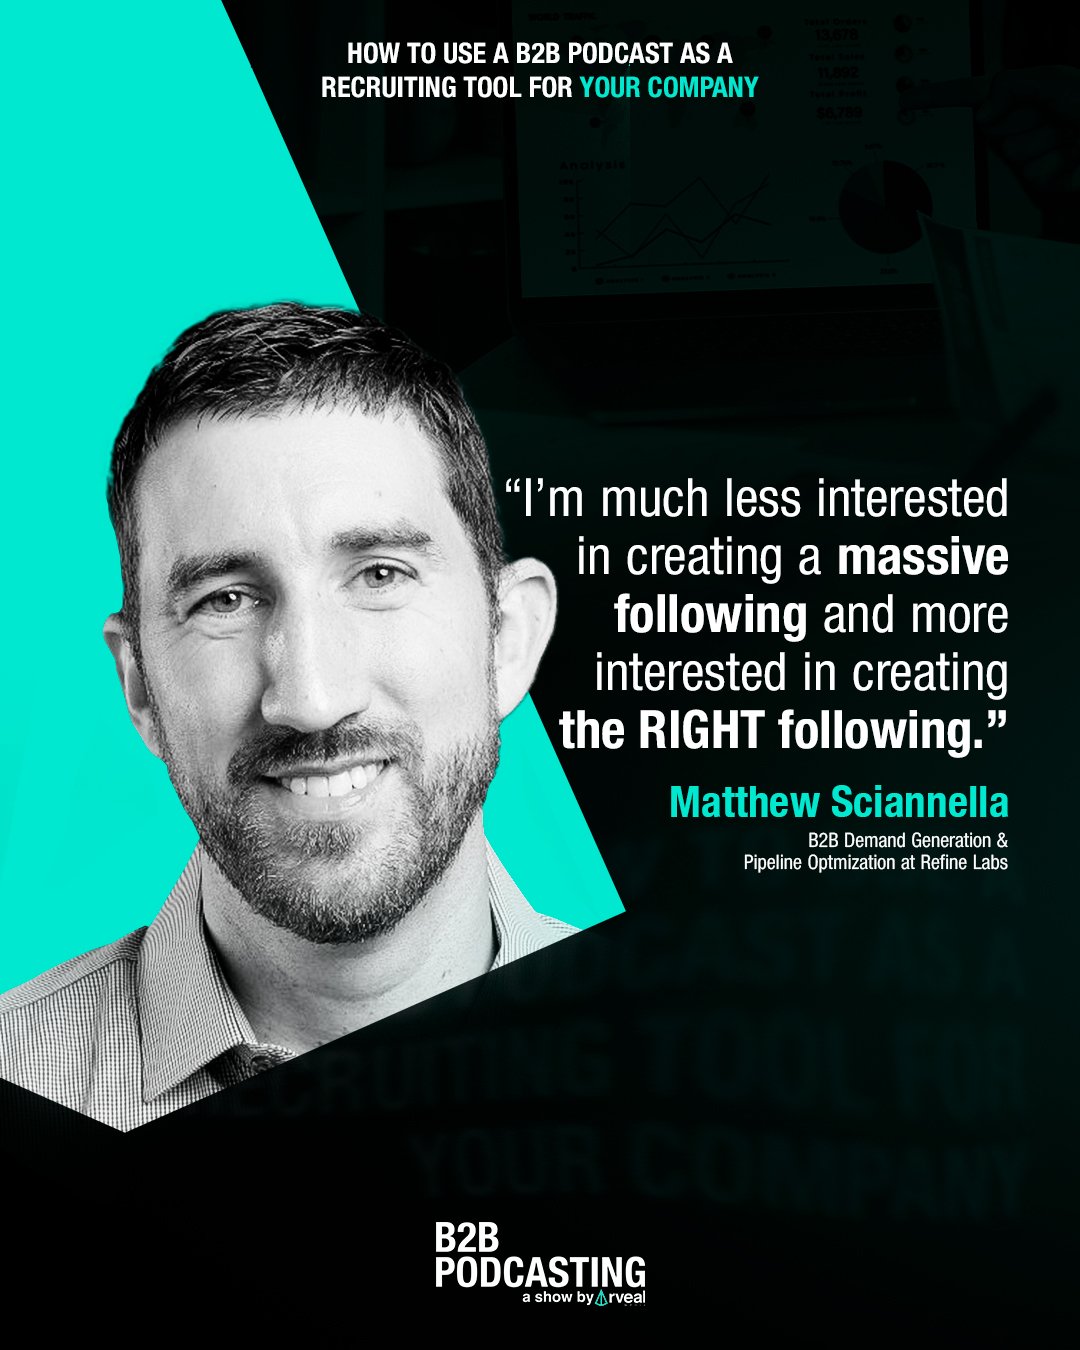 210501_RM_B2BP_Ep_How to use a B2B podcast as a recruiting tool for your company - with Matthew Sciannella_QG4